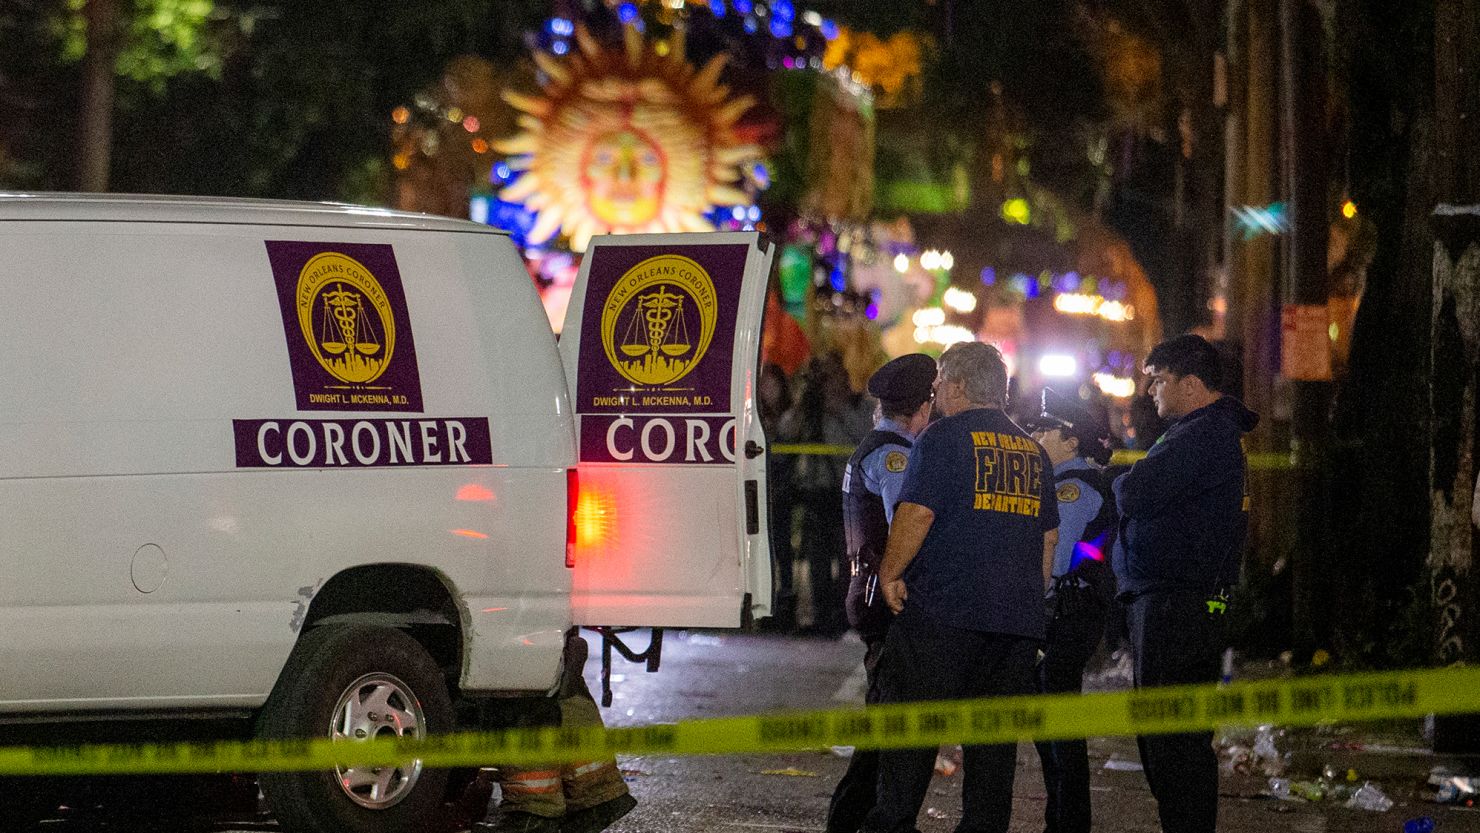 Emergency personnel respond after a person was run over and killed by a float in New Orleans.